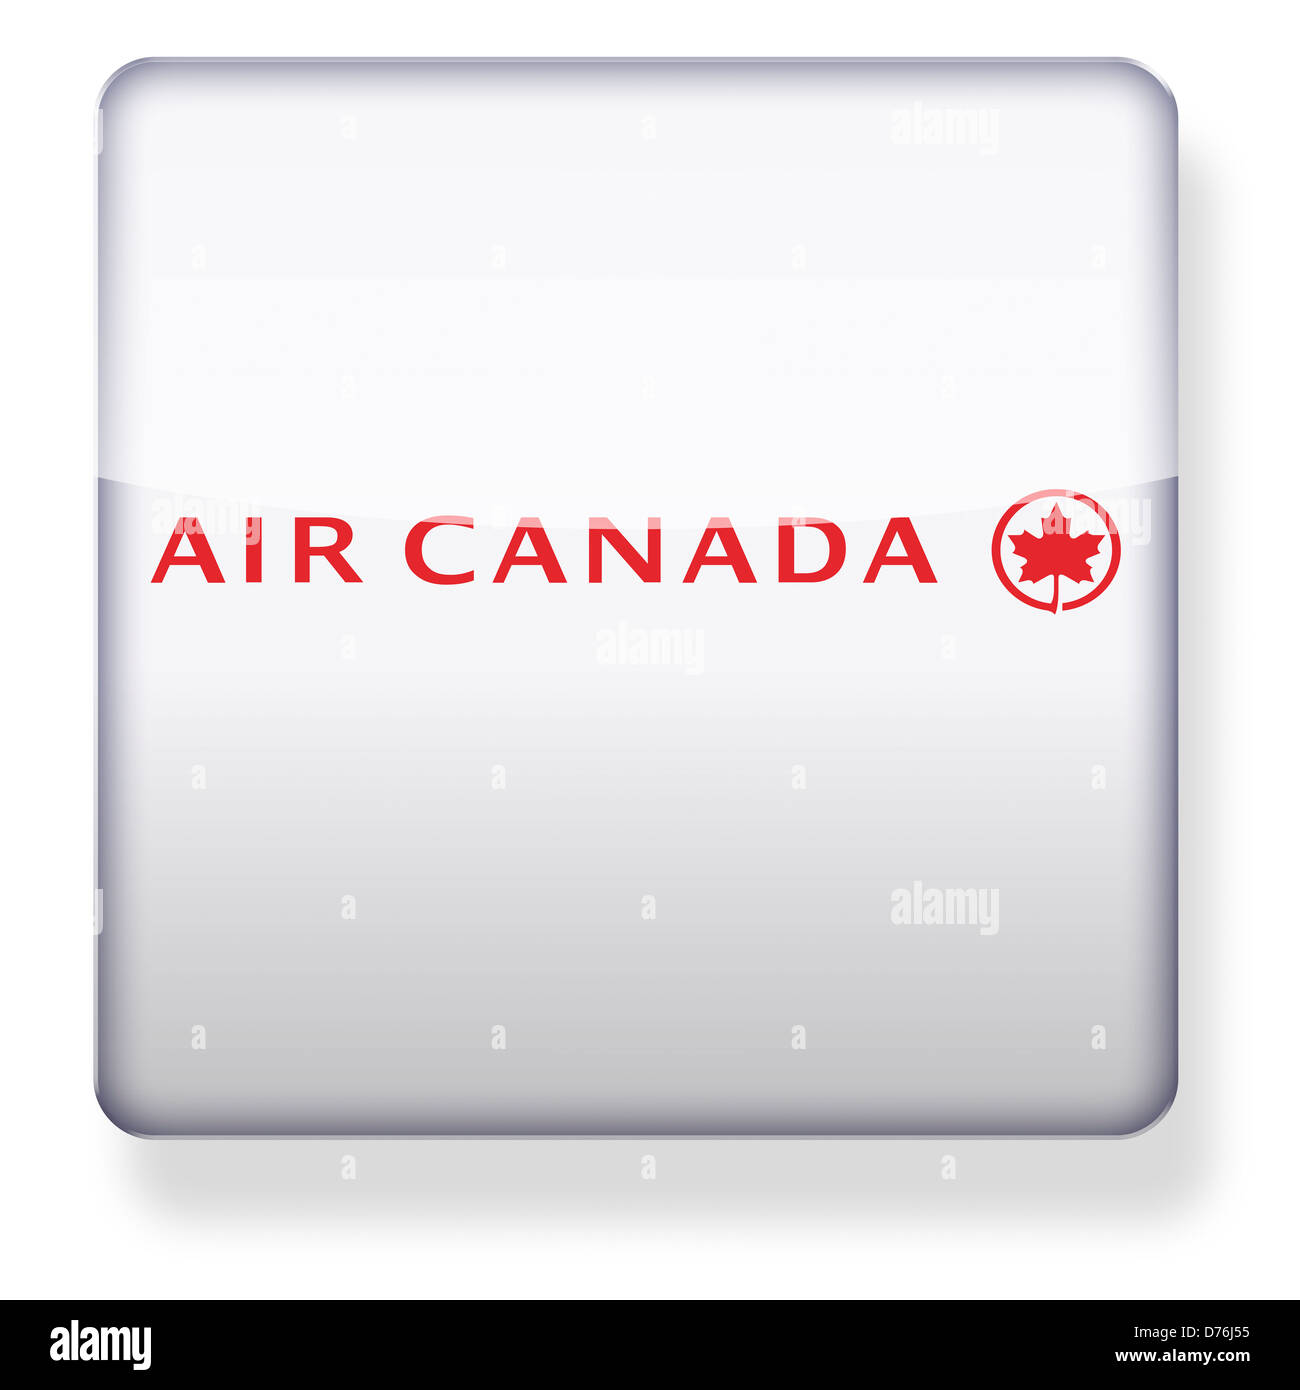 Air Canada logo as an app icon. Clipping path included. Stock Photo